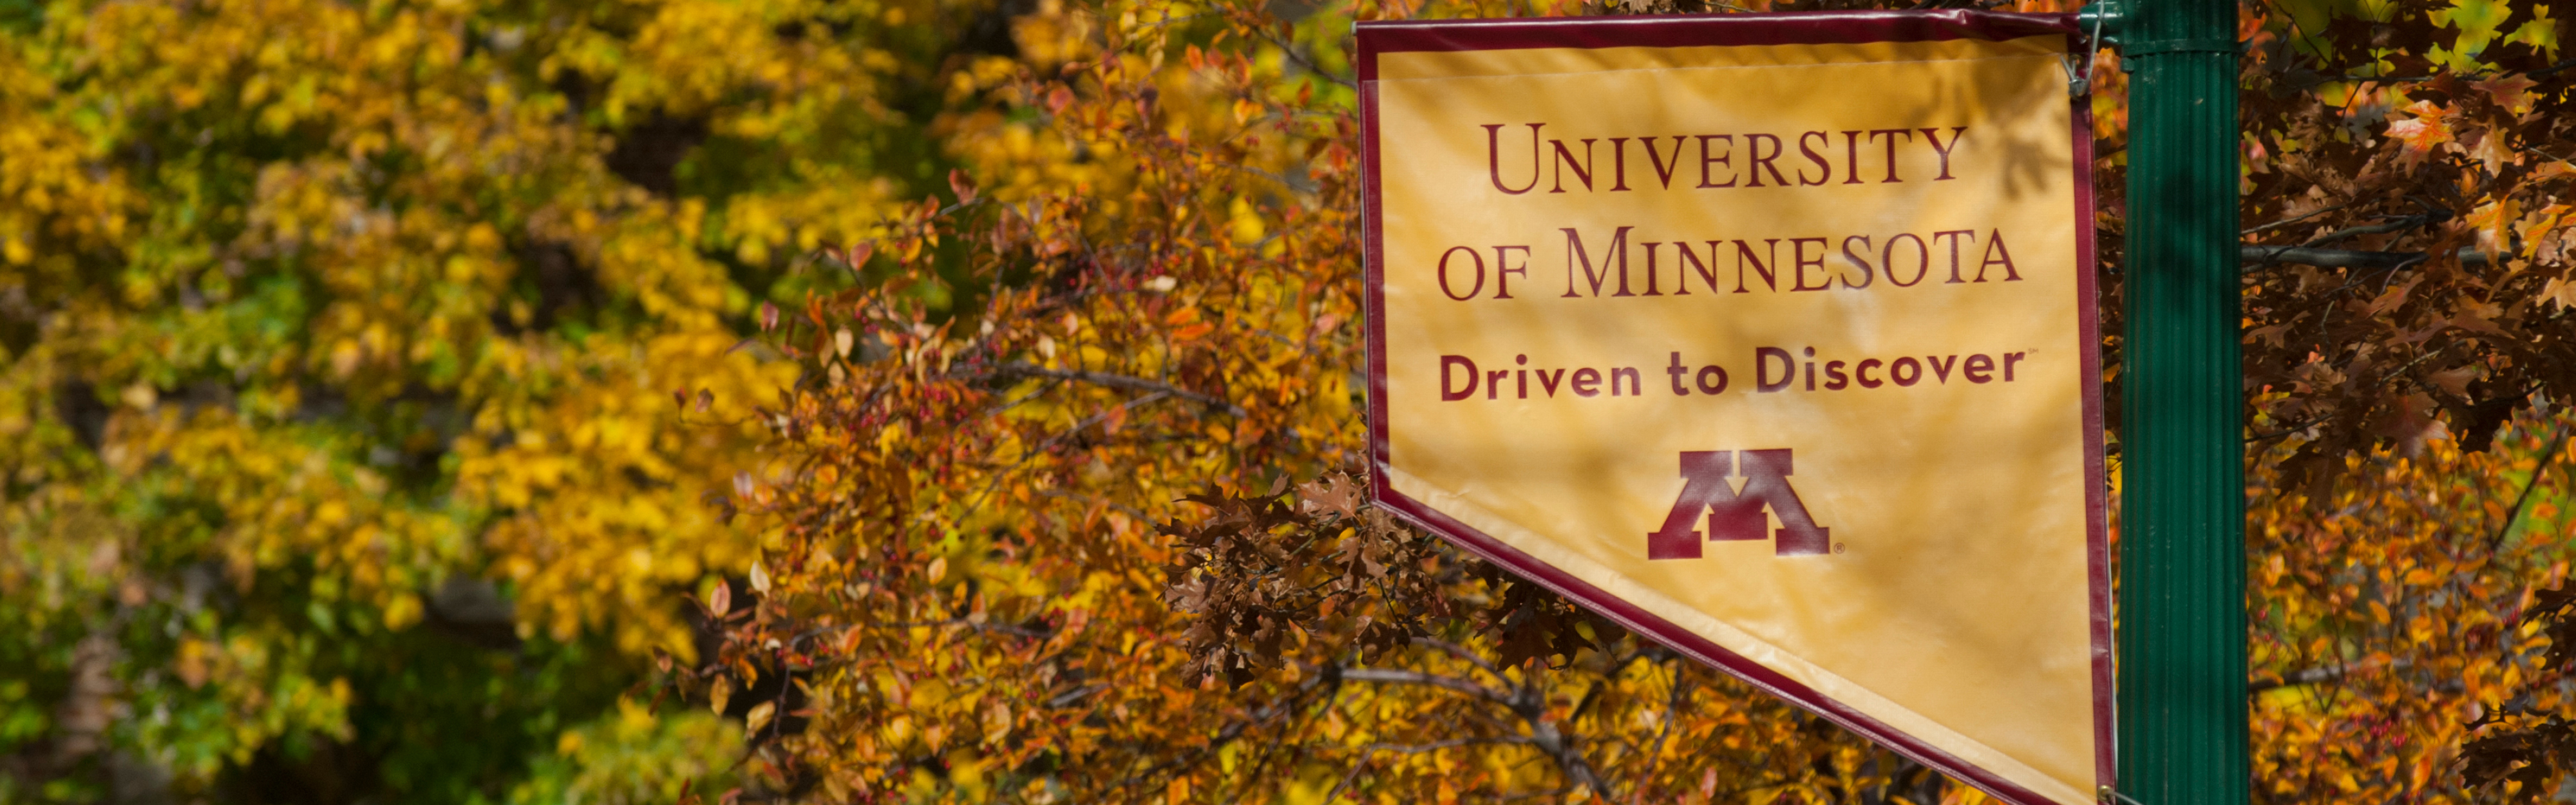 Flag with the text "University of Minnesota - Driven to Discover" with a block M.